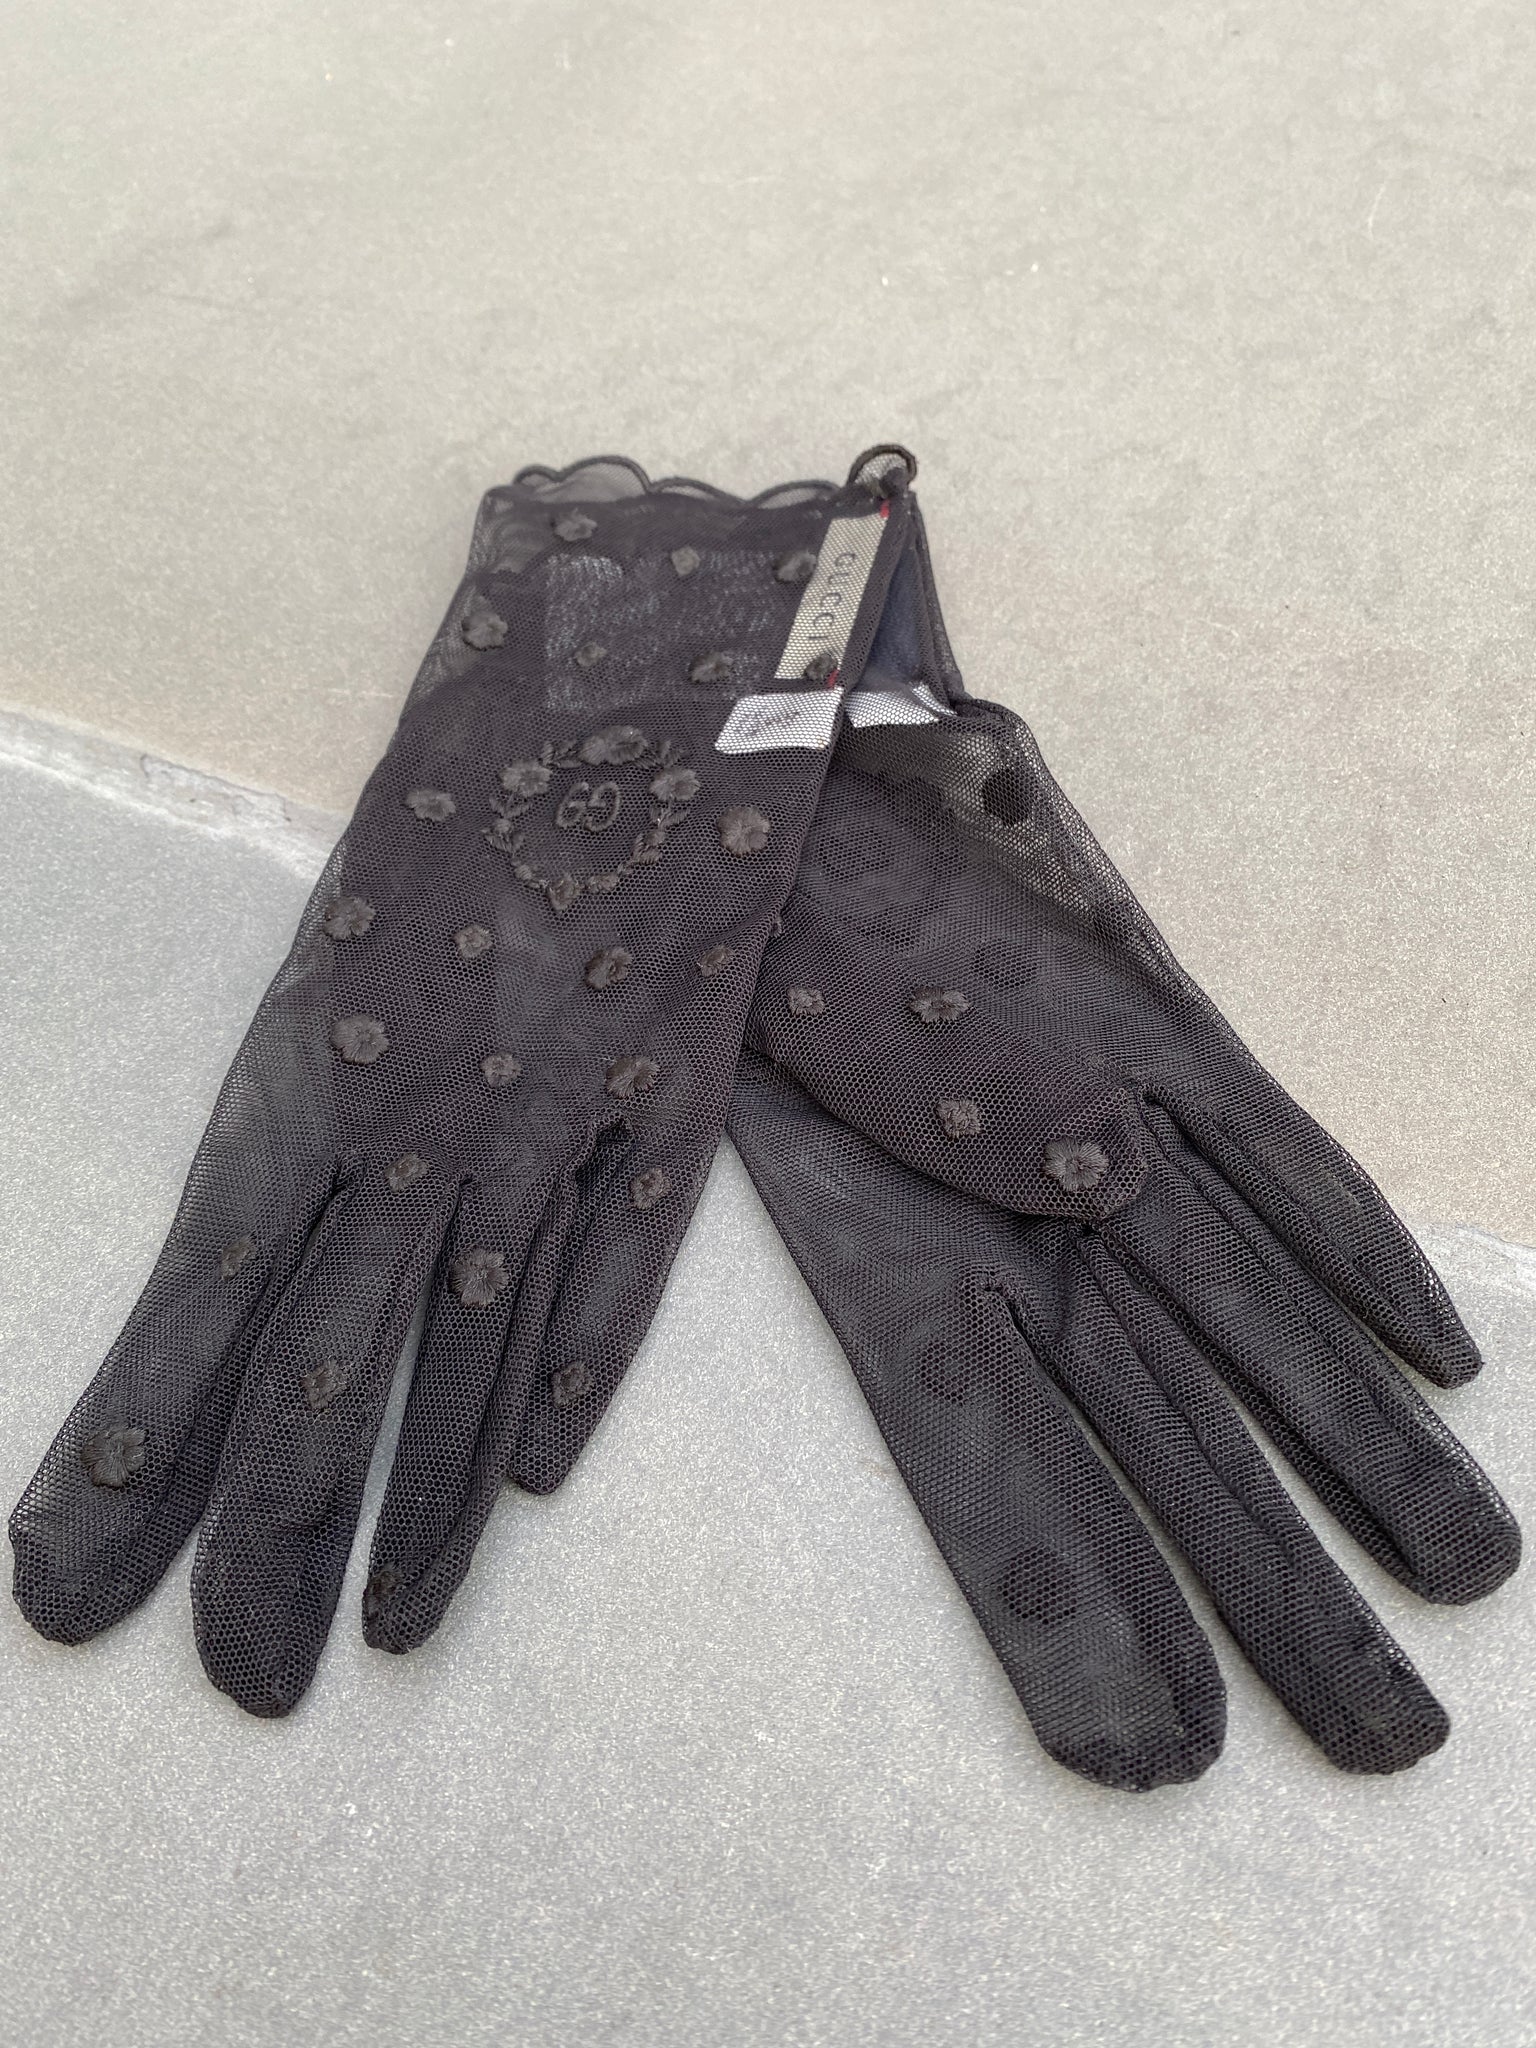 Gucci Gg-embroidered Tulle Gloves in Black